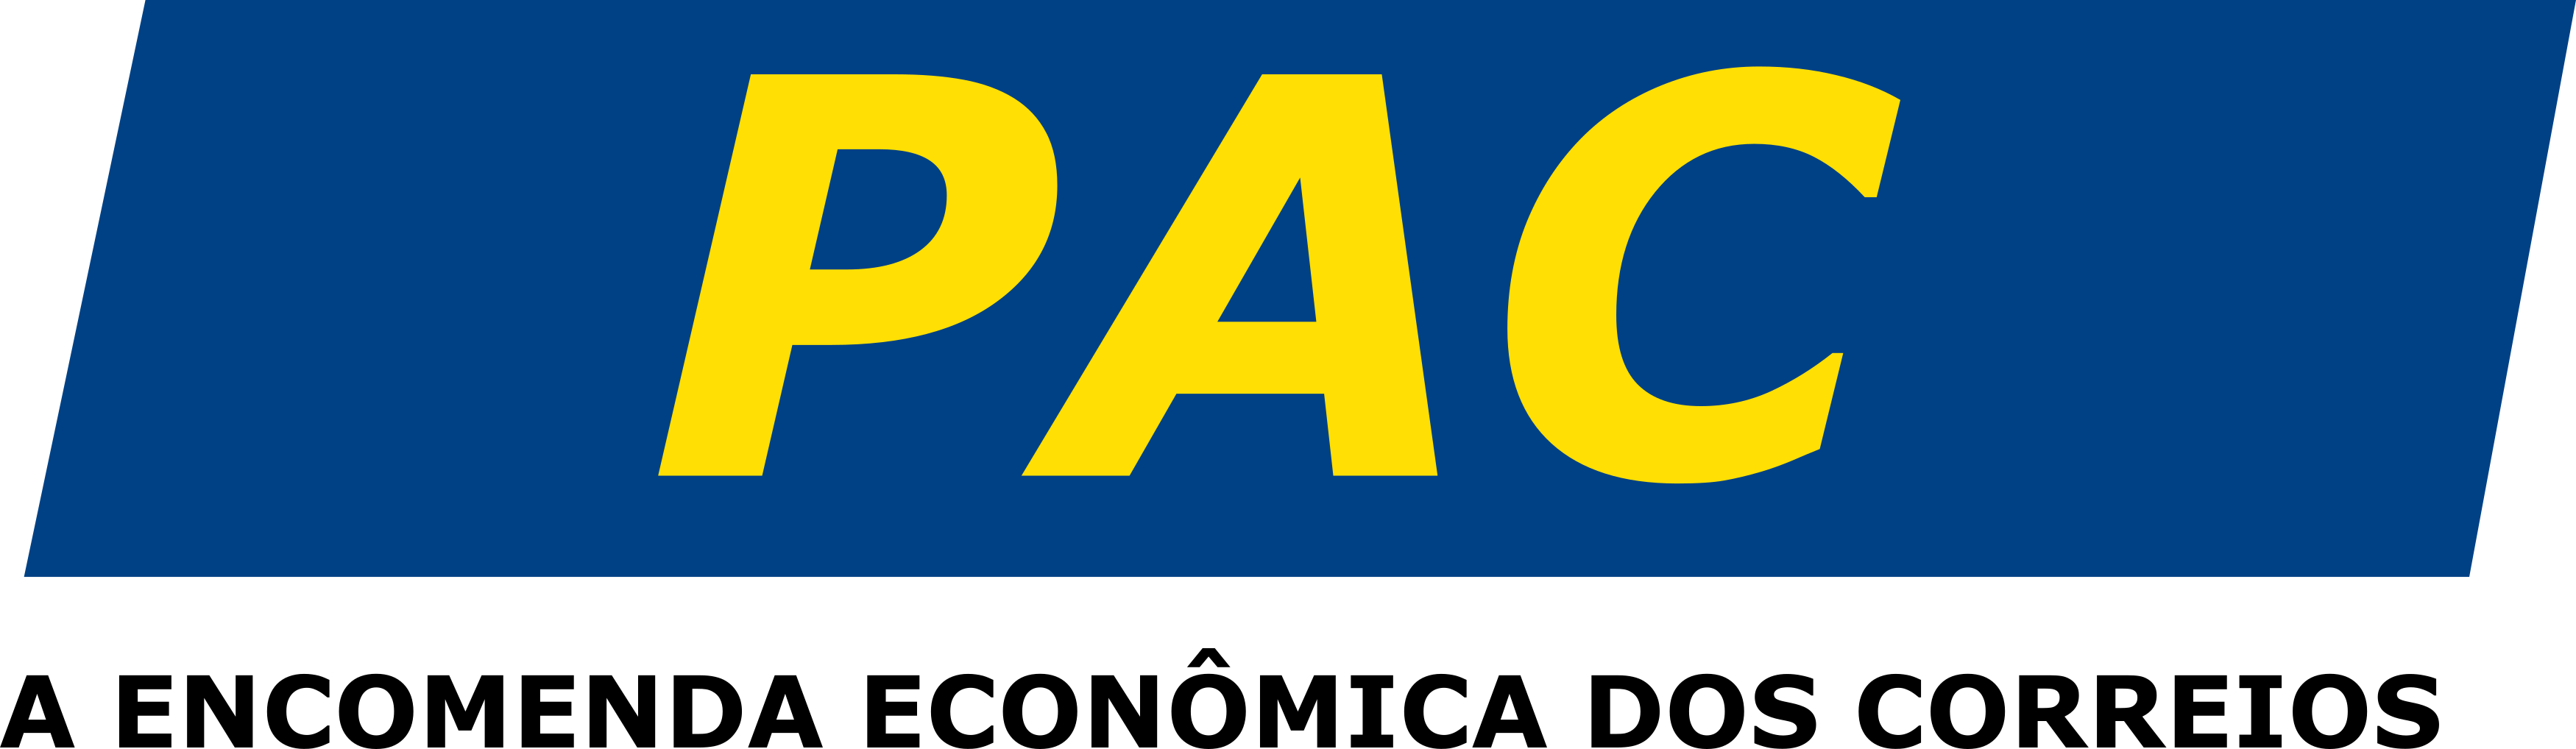 Pac.png